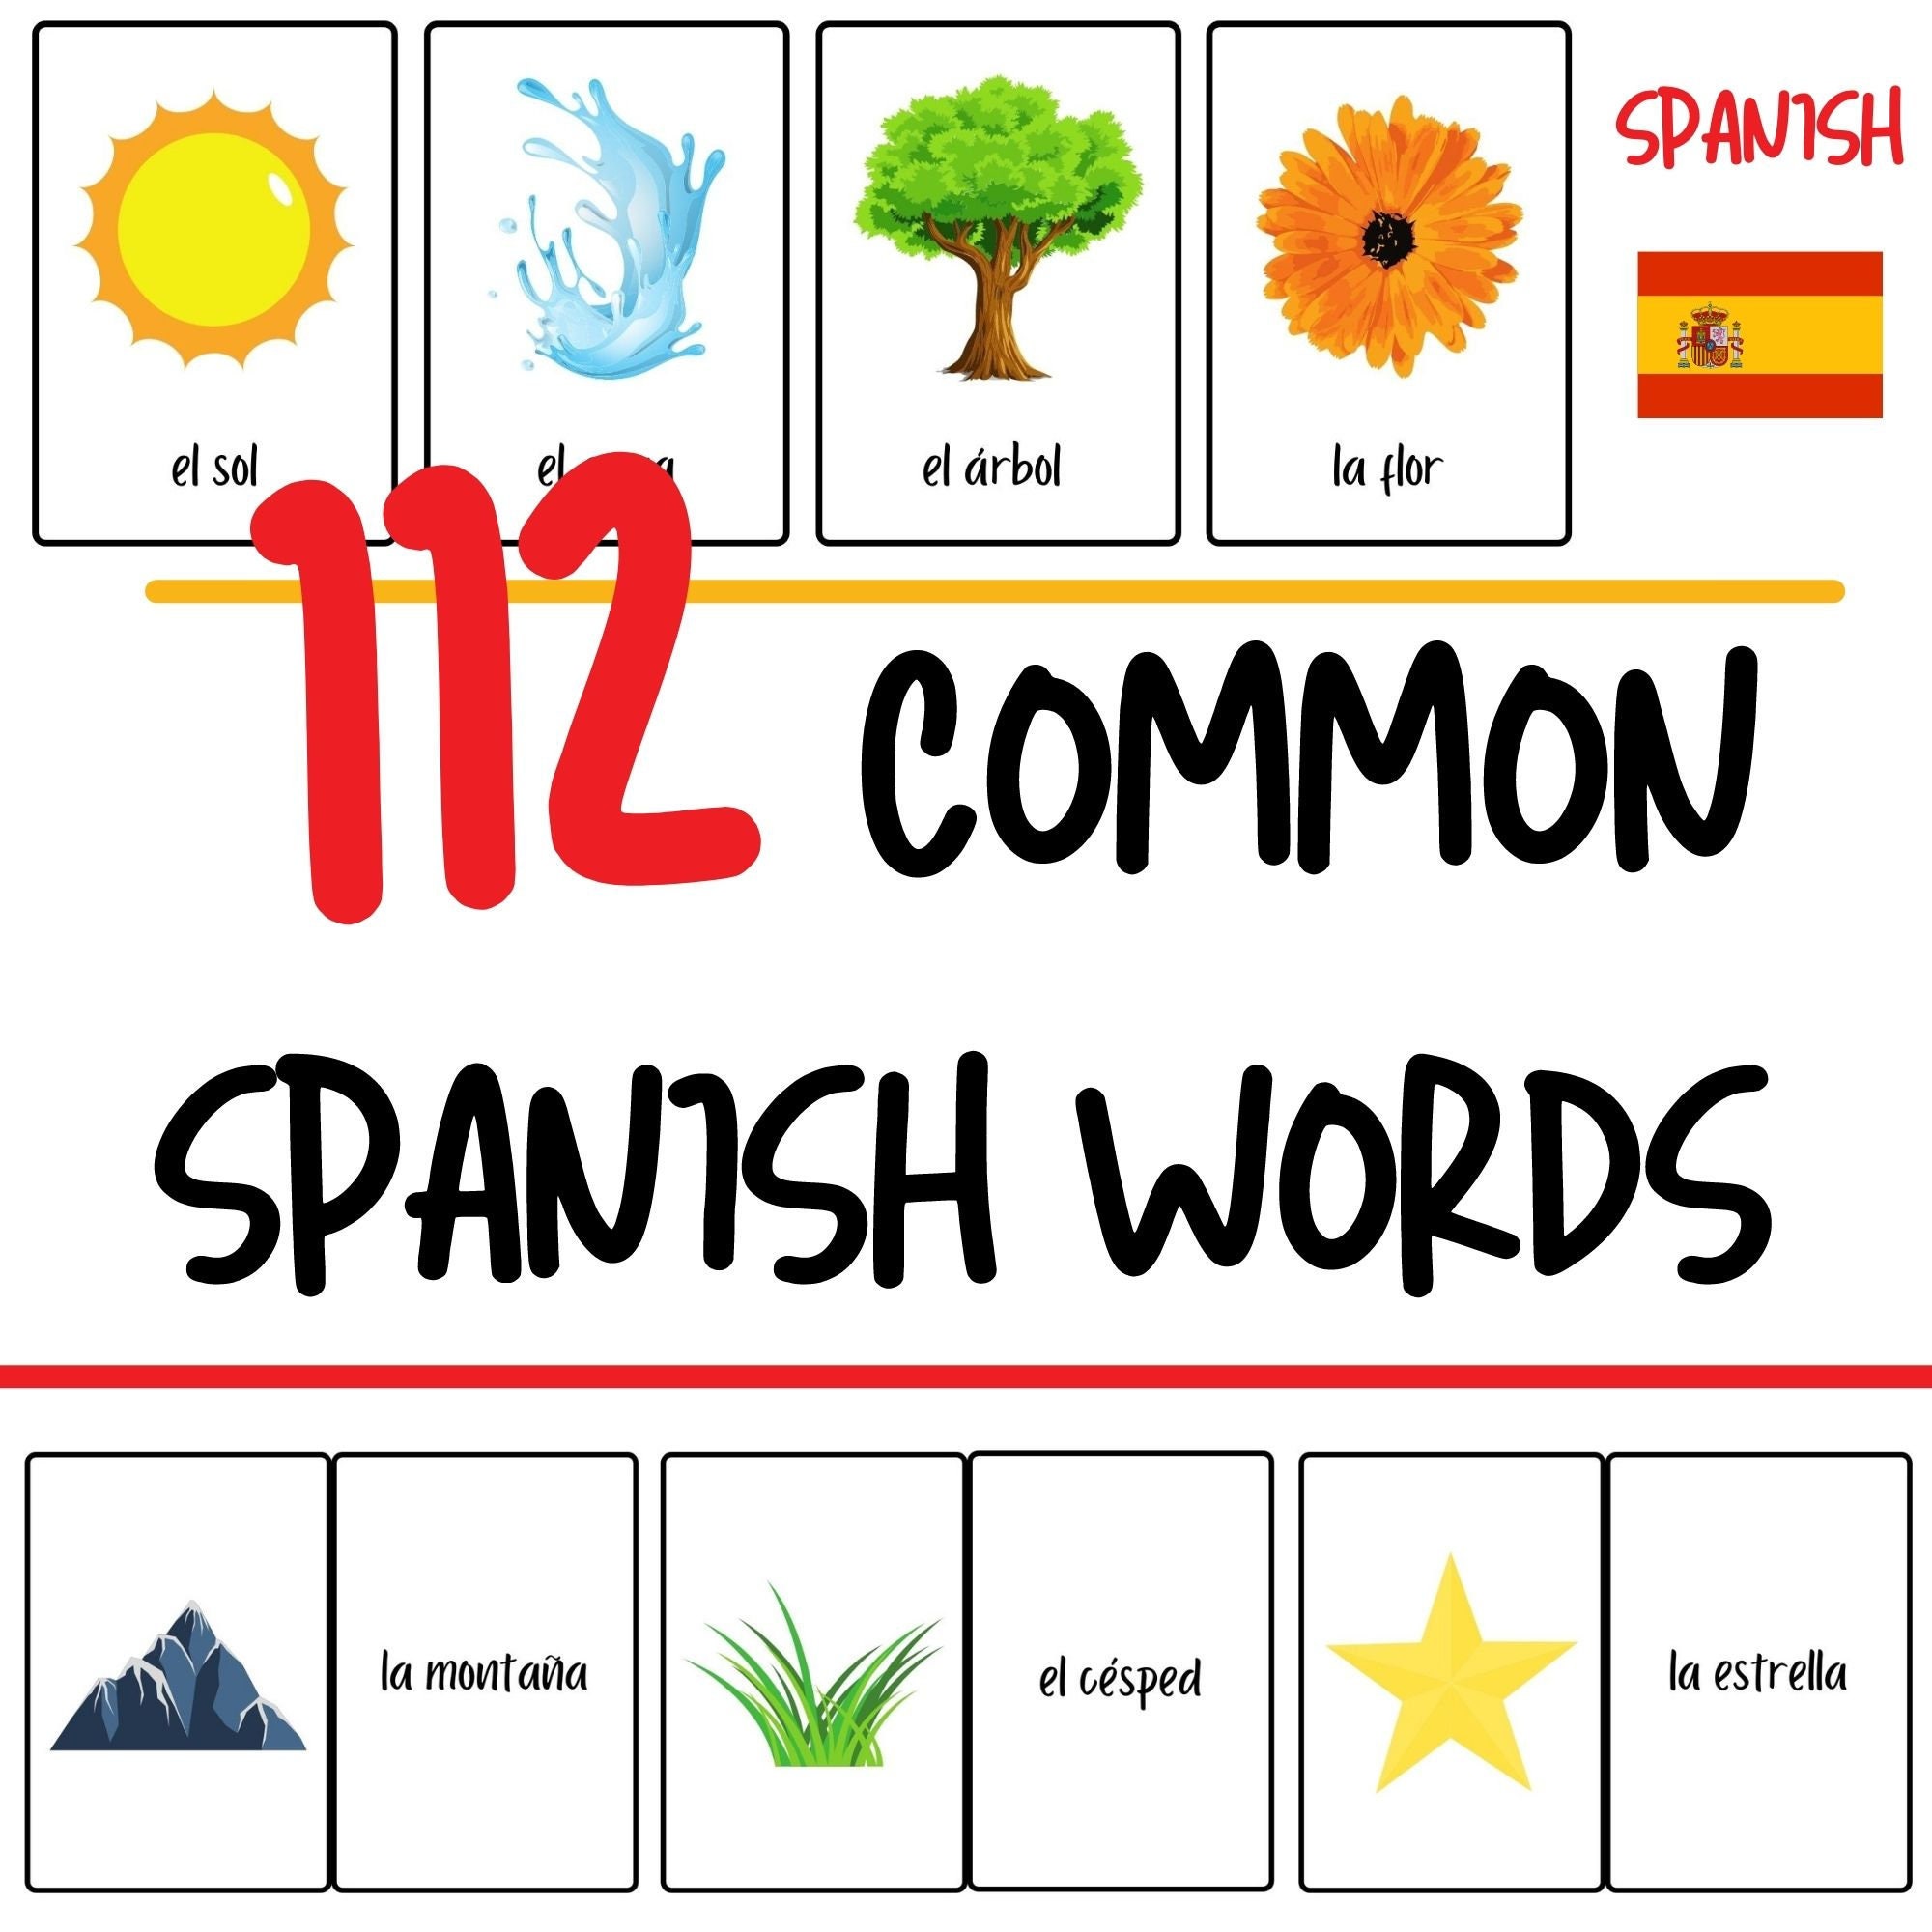 Essential English Phrase Flashcards with Spanish Translation and Pictures